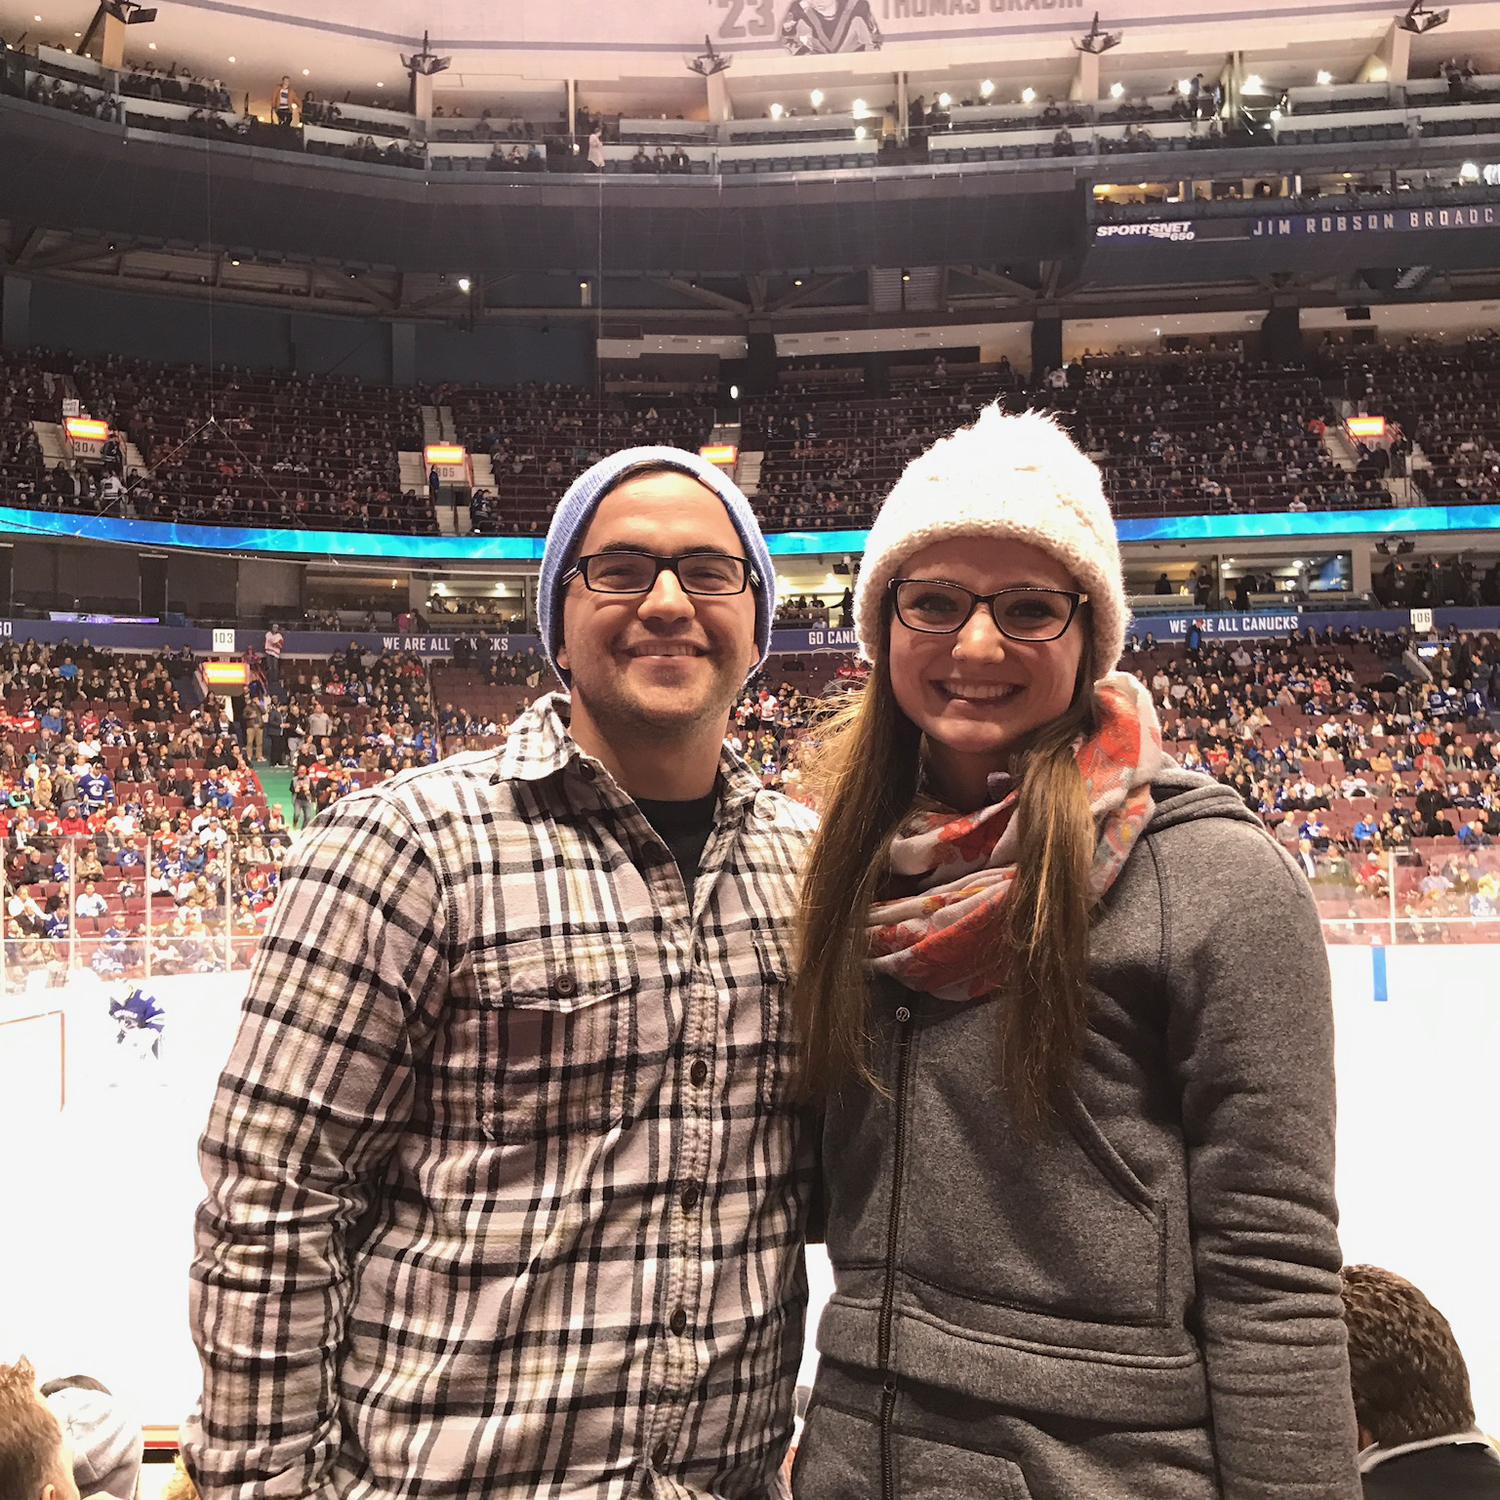 Our first Canucks hockey game together, in Vancouver, B.C., 2017